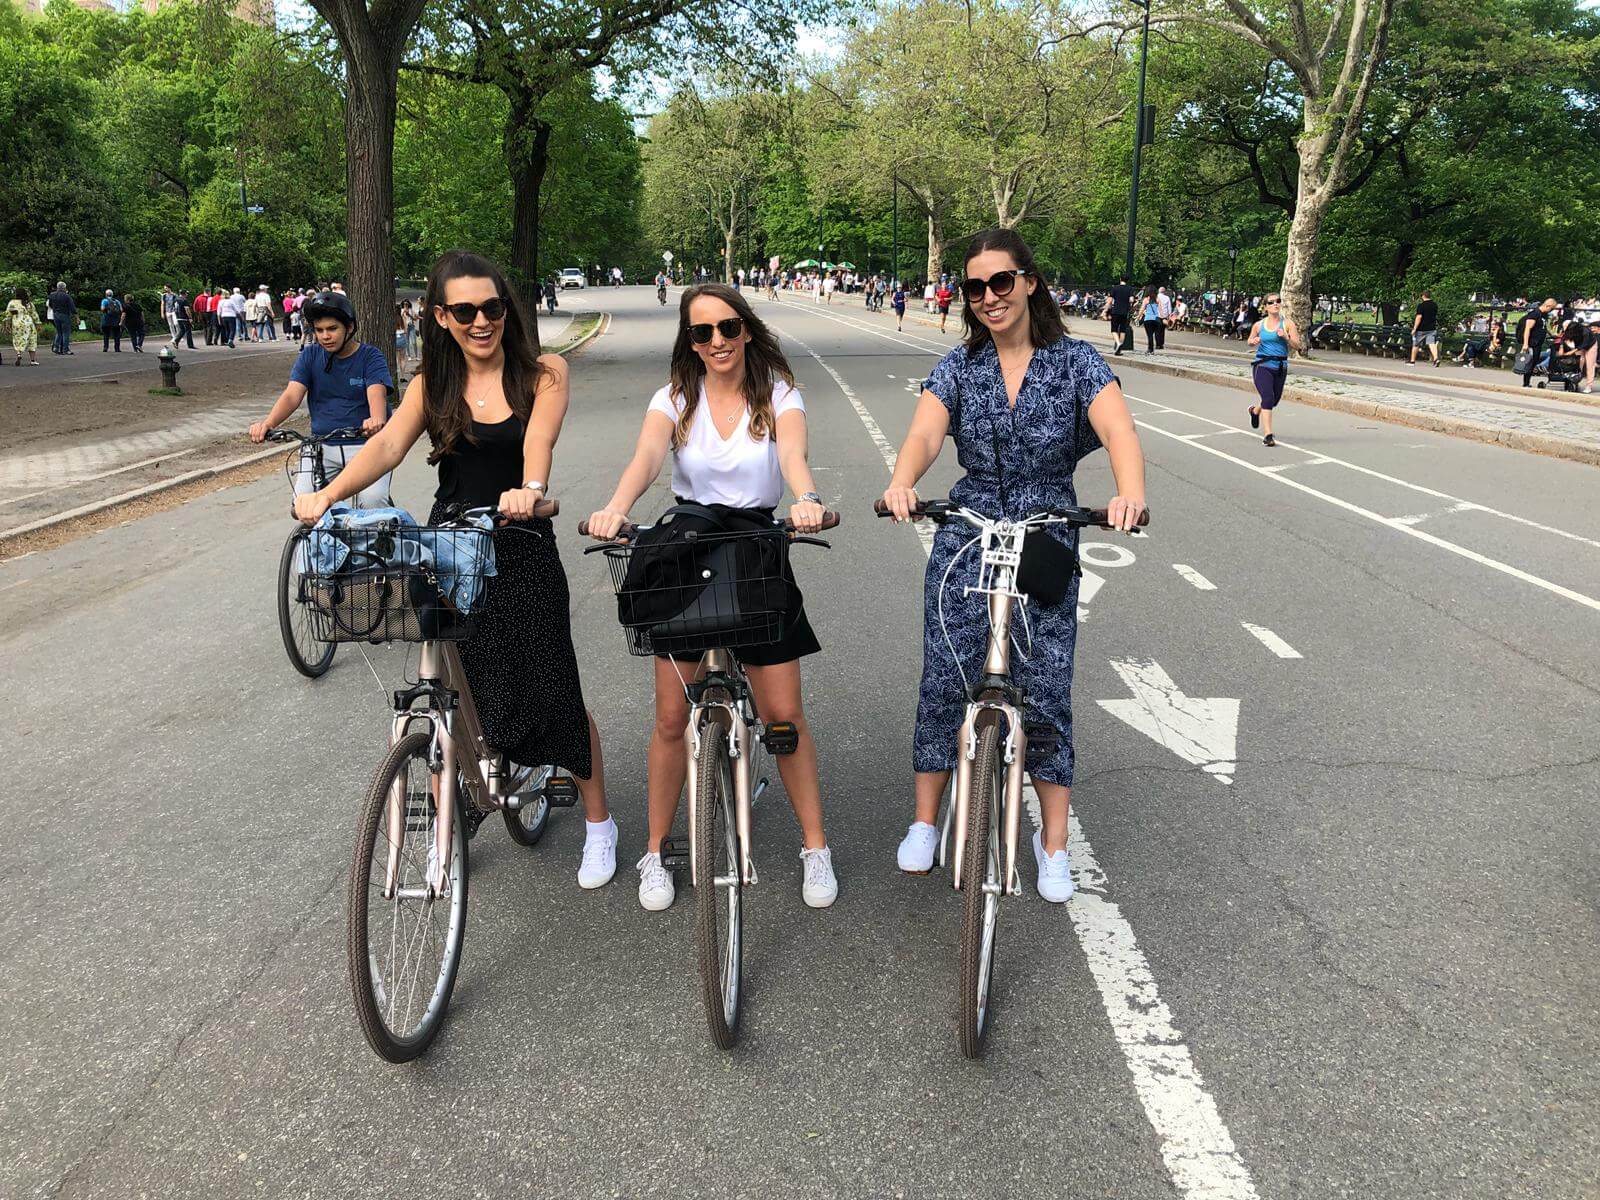 New Yorkriding bikes in central park